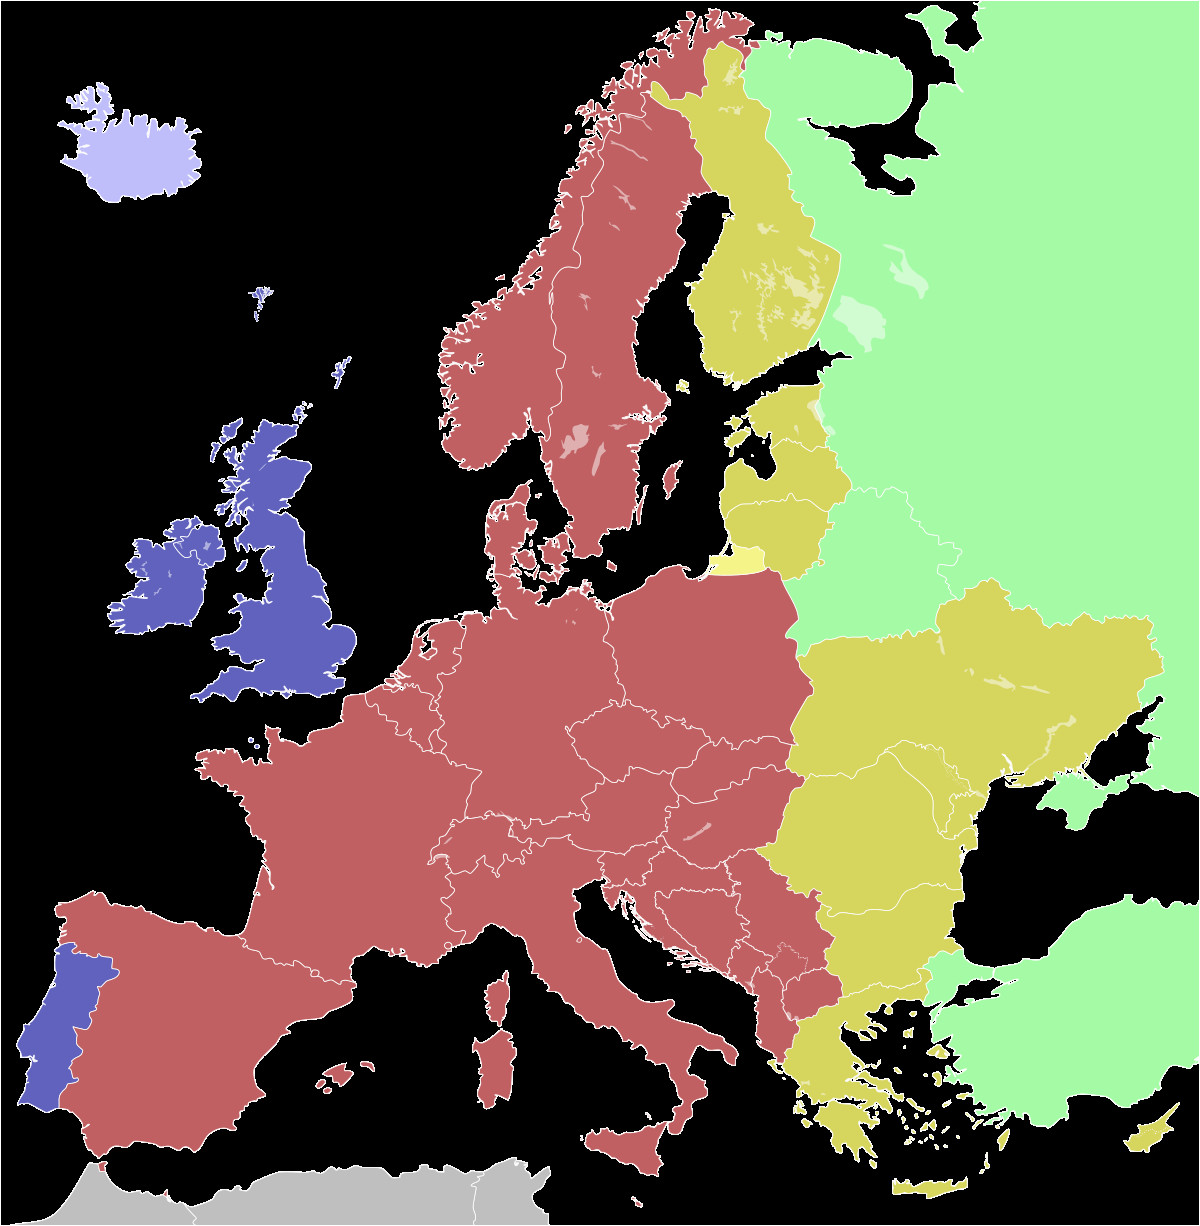 Map Time Zones Europe Central European Summer Time Wikipedia | secretmuseum